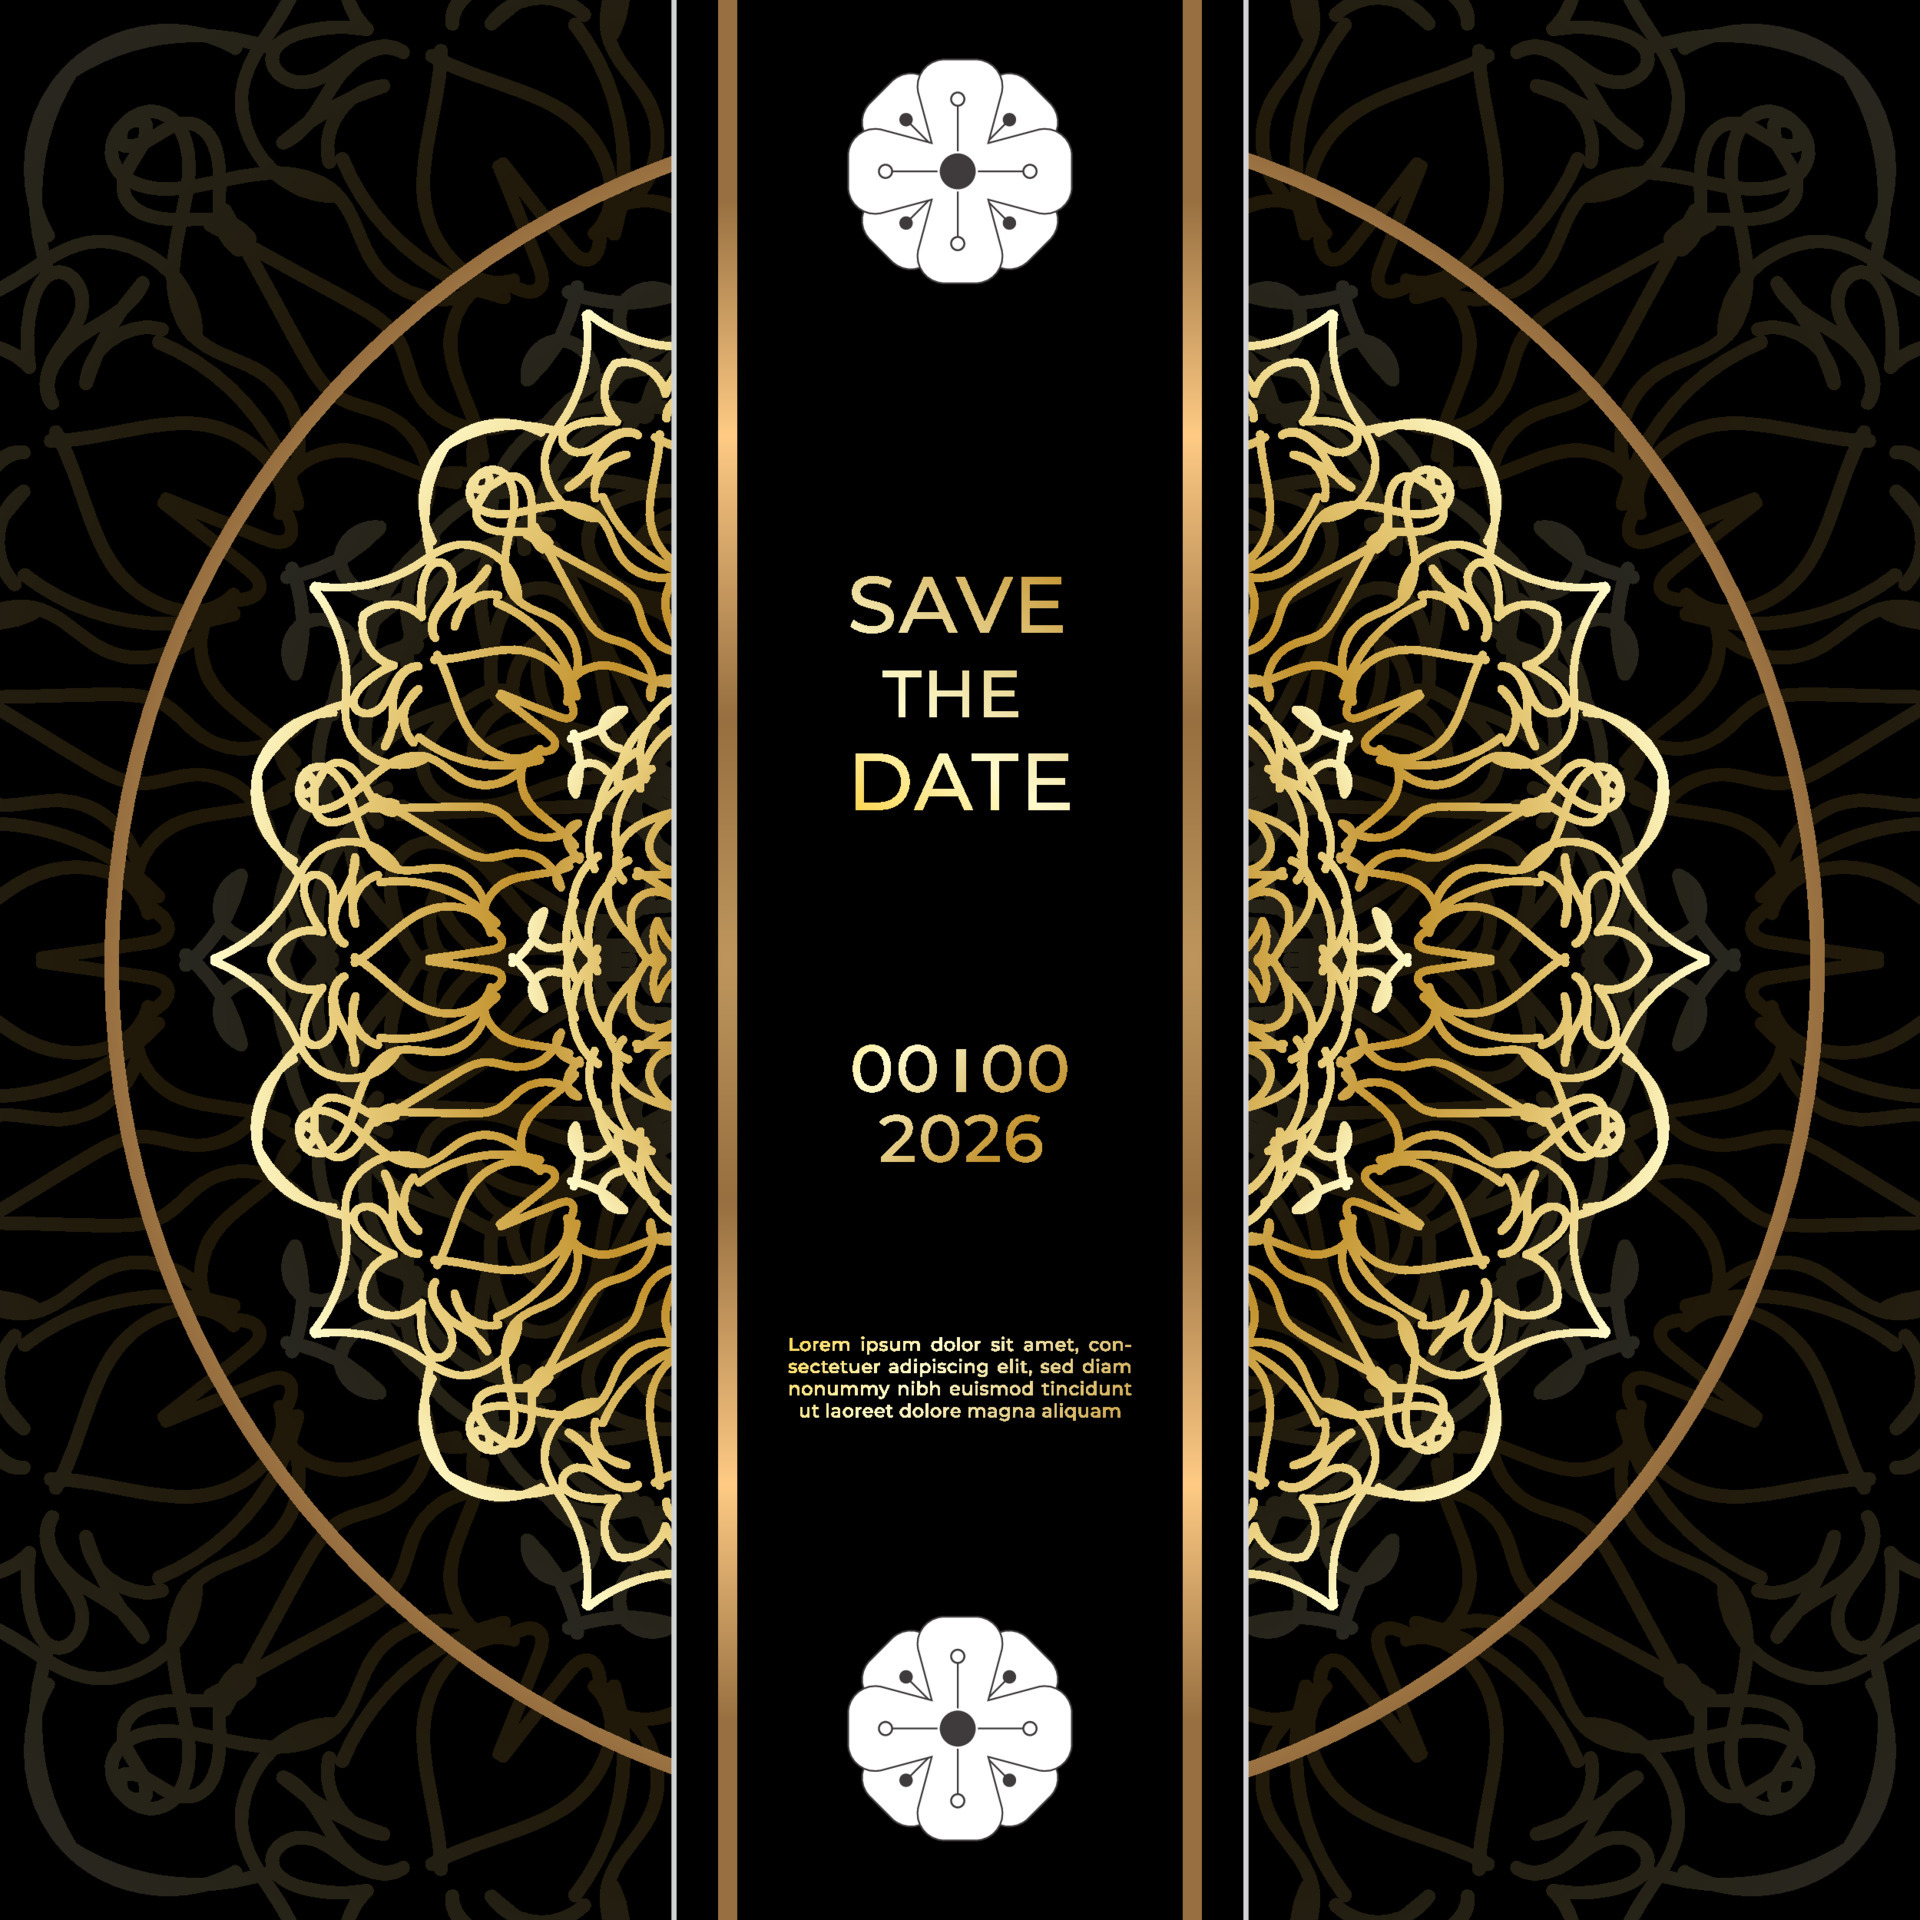 Save The Date Invitation Card Design In Henna Tattoo Styleluxury Mandala  Background With Golden Arabesque Pattern Arabic Islamic East Style  Decorative Mandala For Print Poster Cover Brochure Flye Stock Illustration   Download